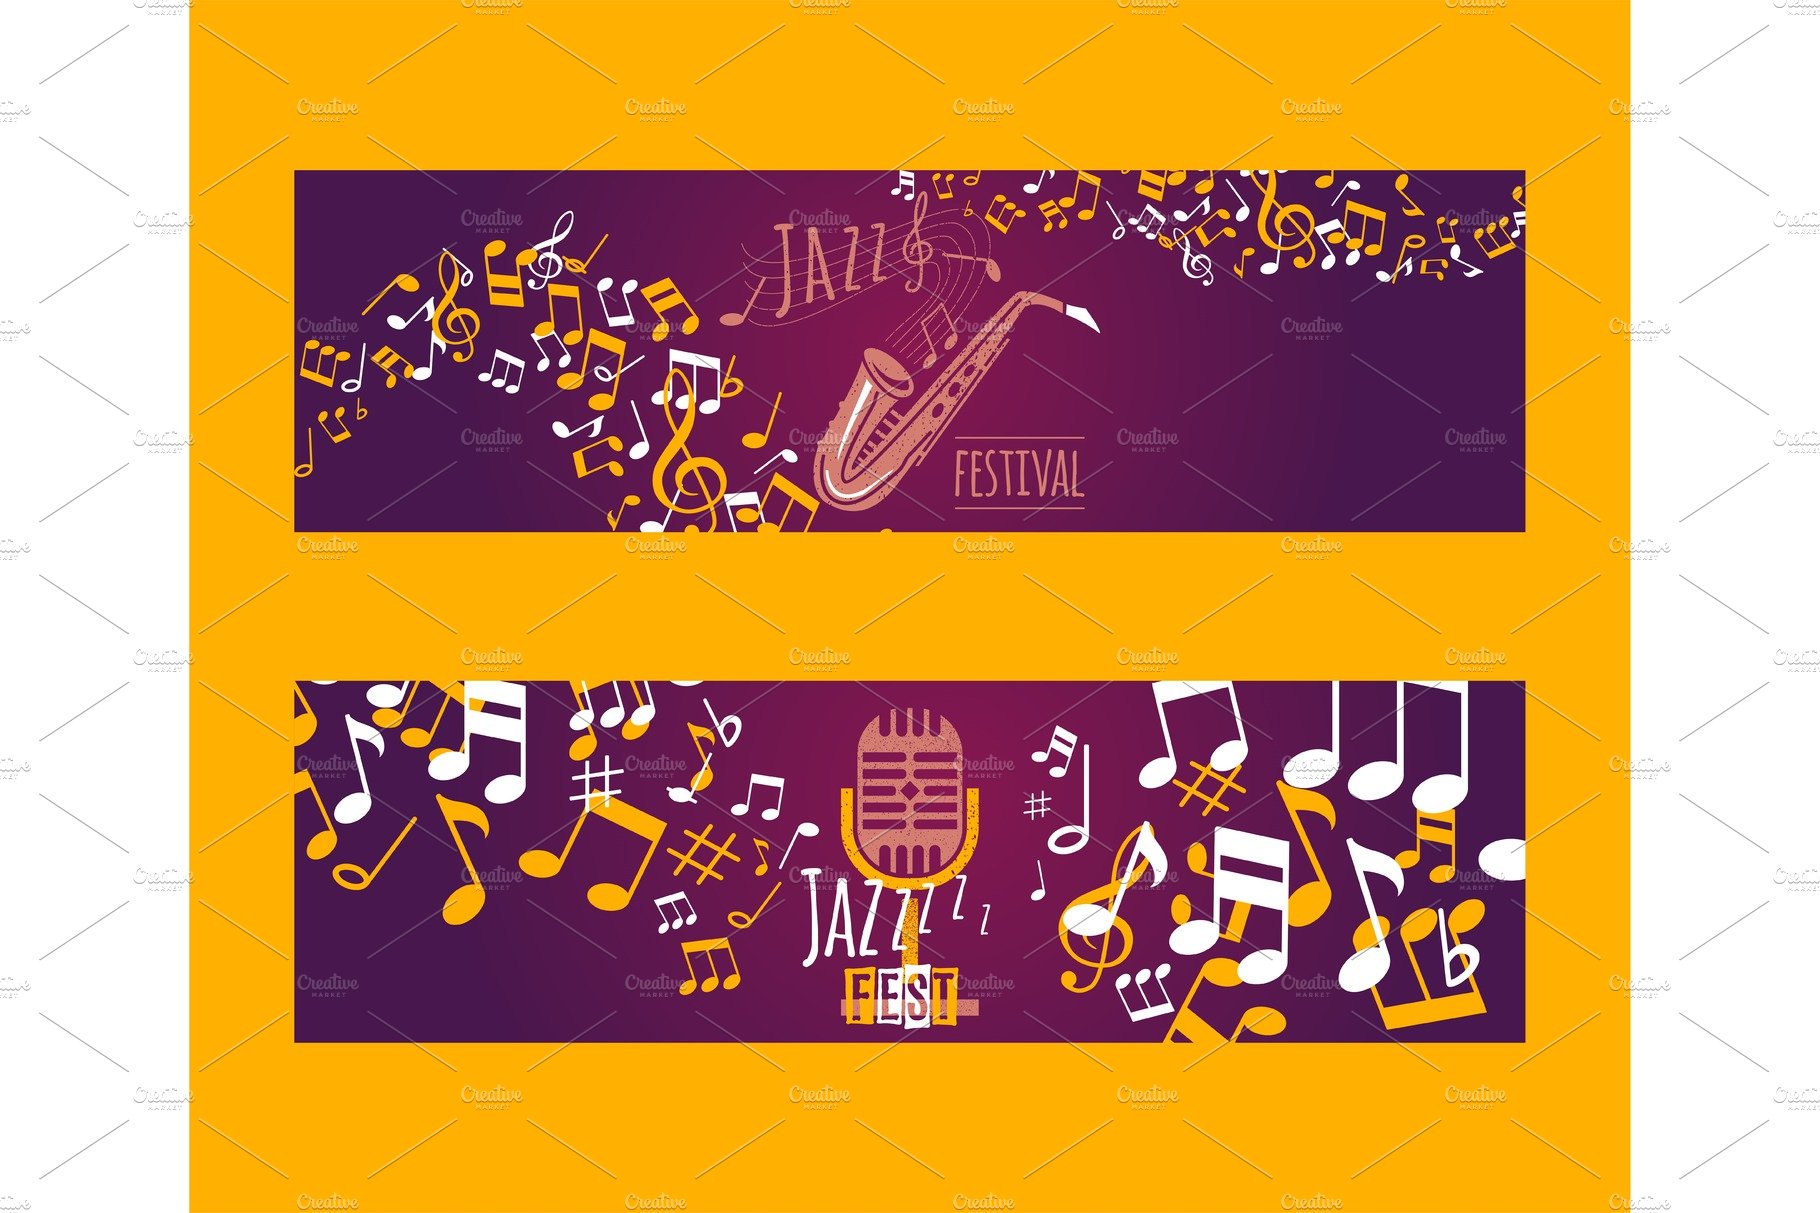 Musical instruments set of banners cover image.